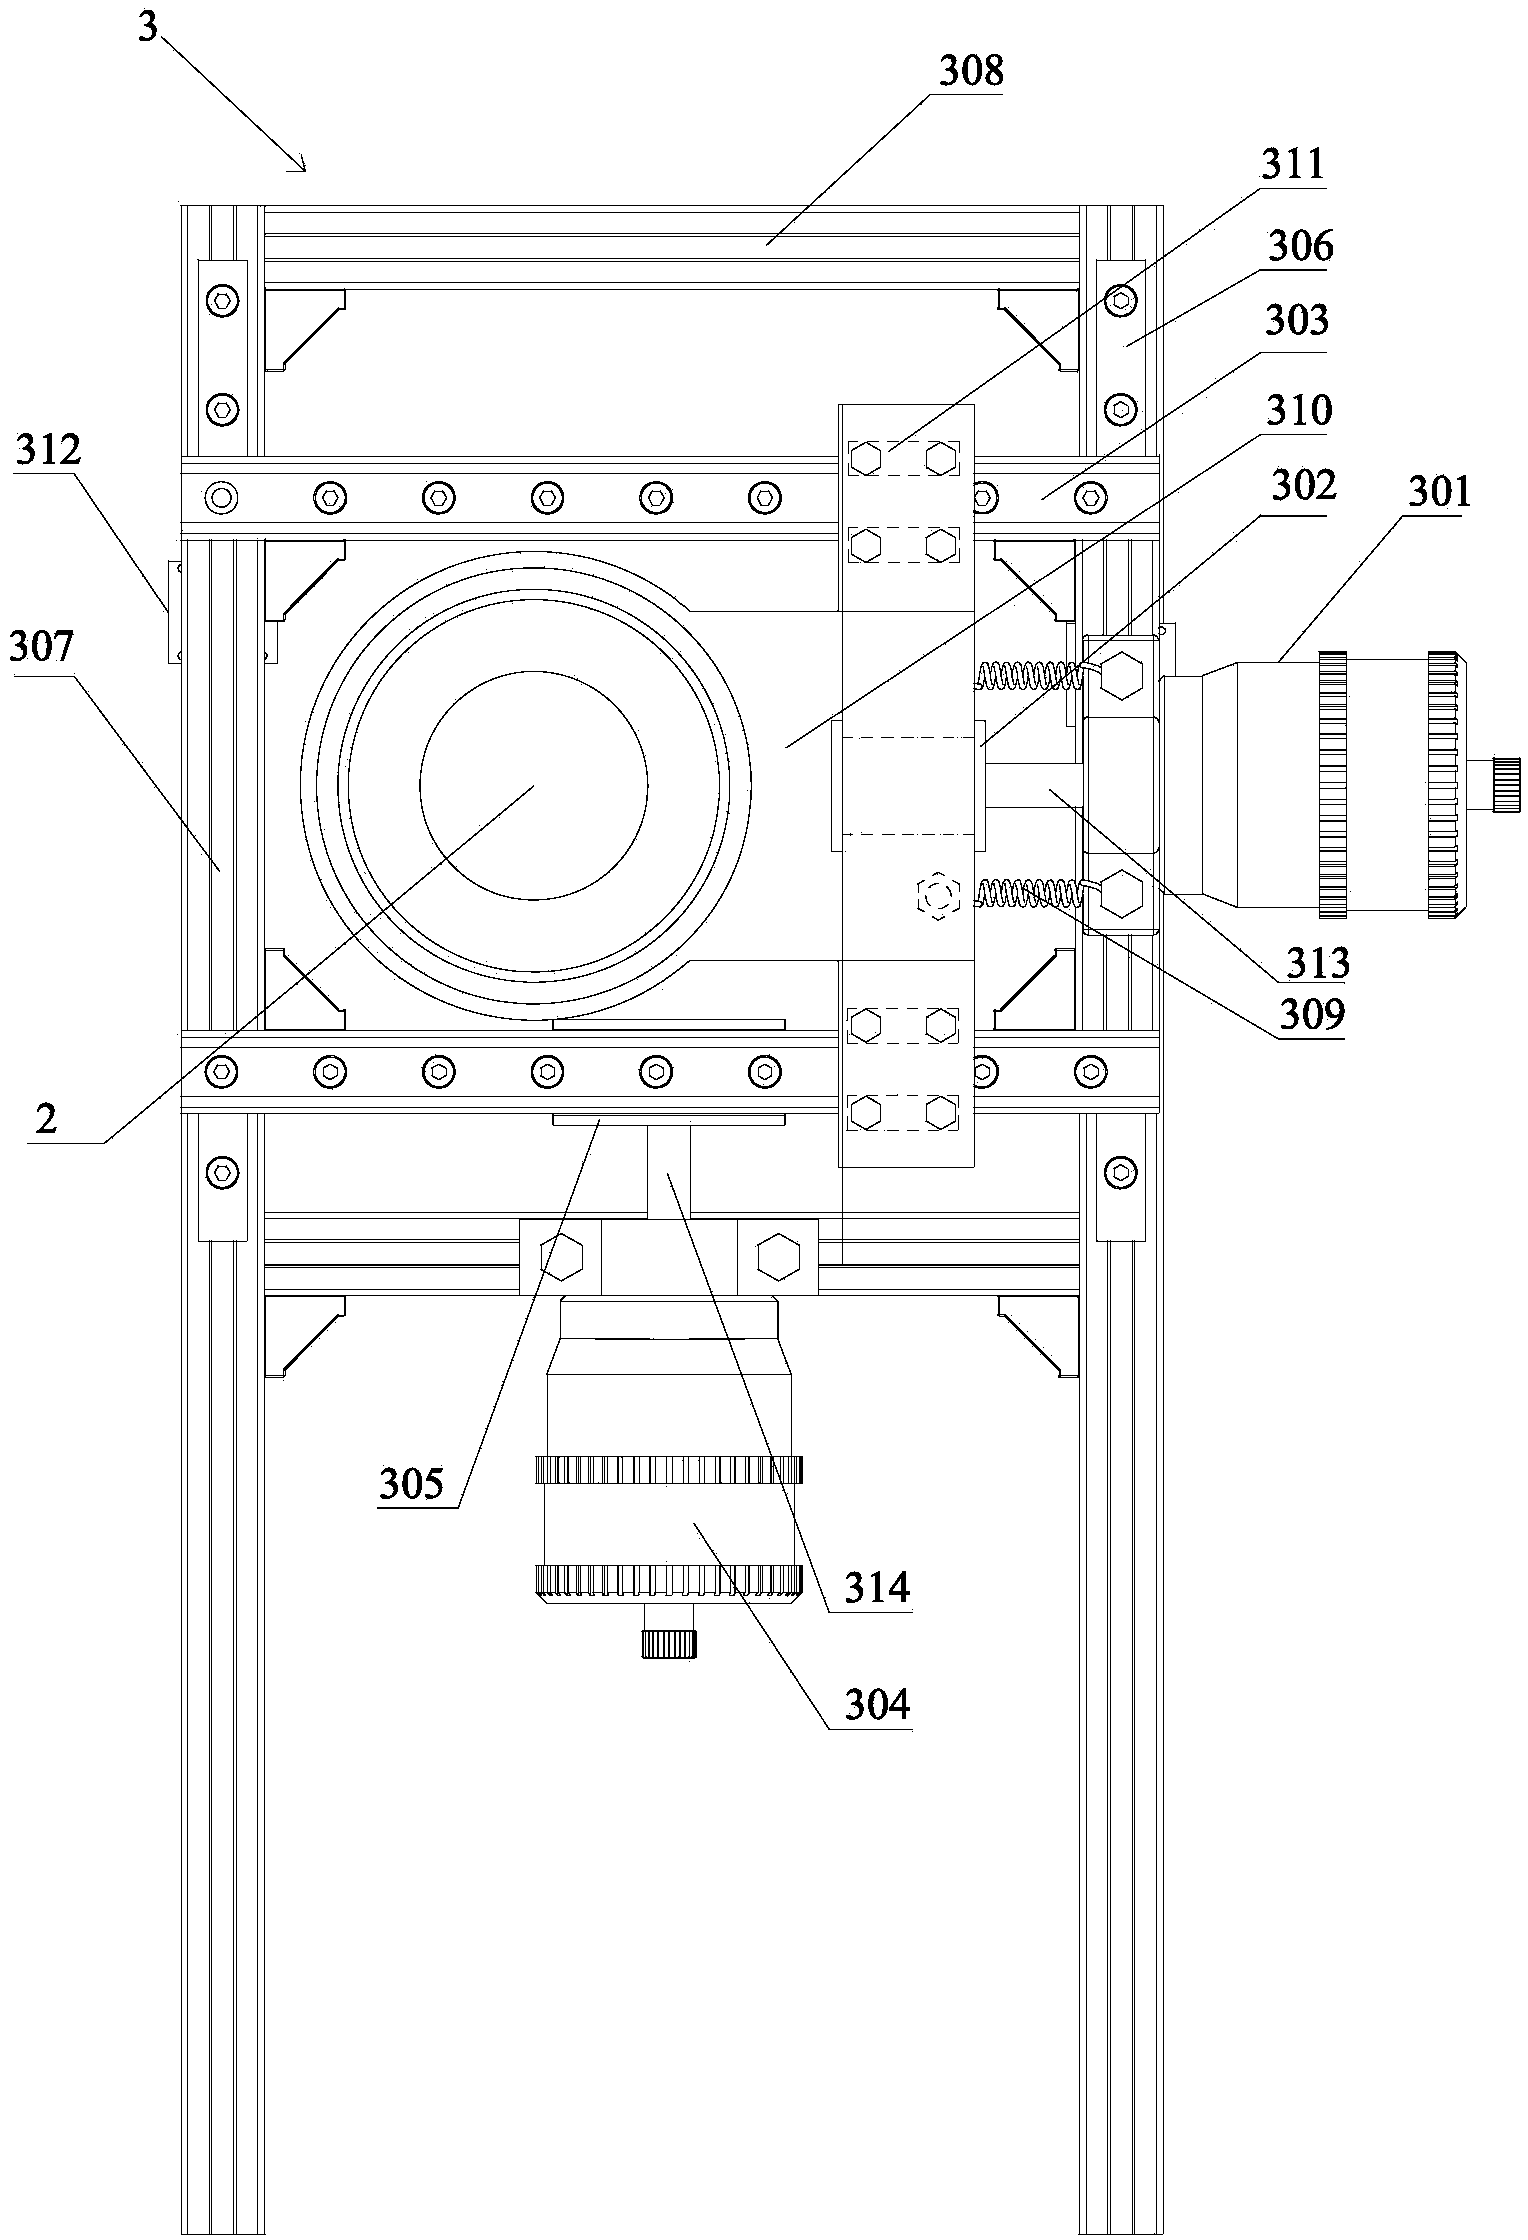 Real-time image observation and acquisition platform and method for microstructure of material with loads